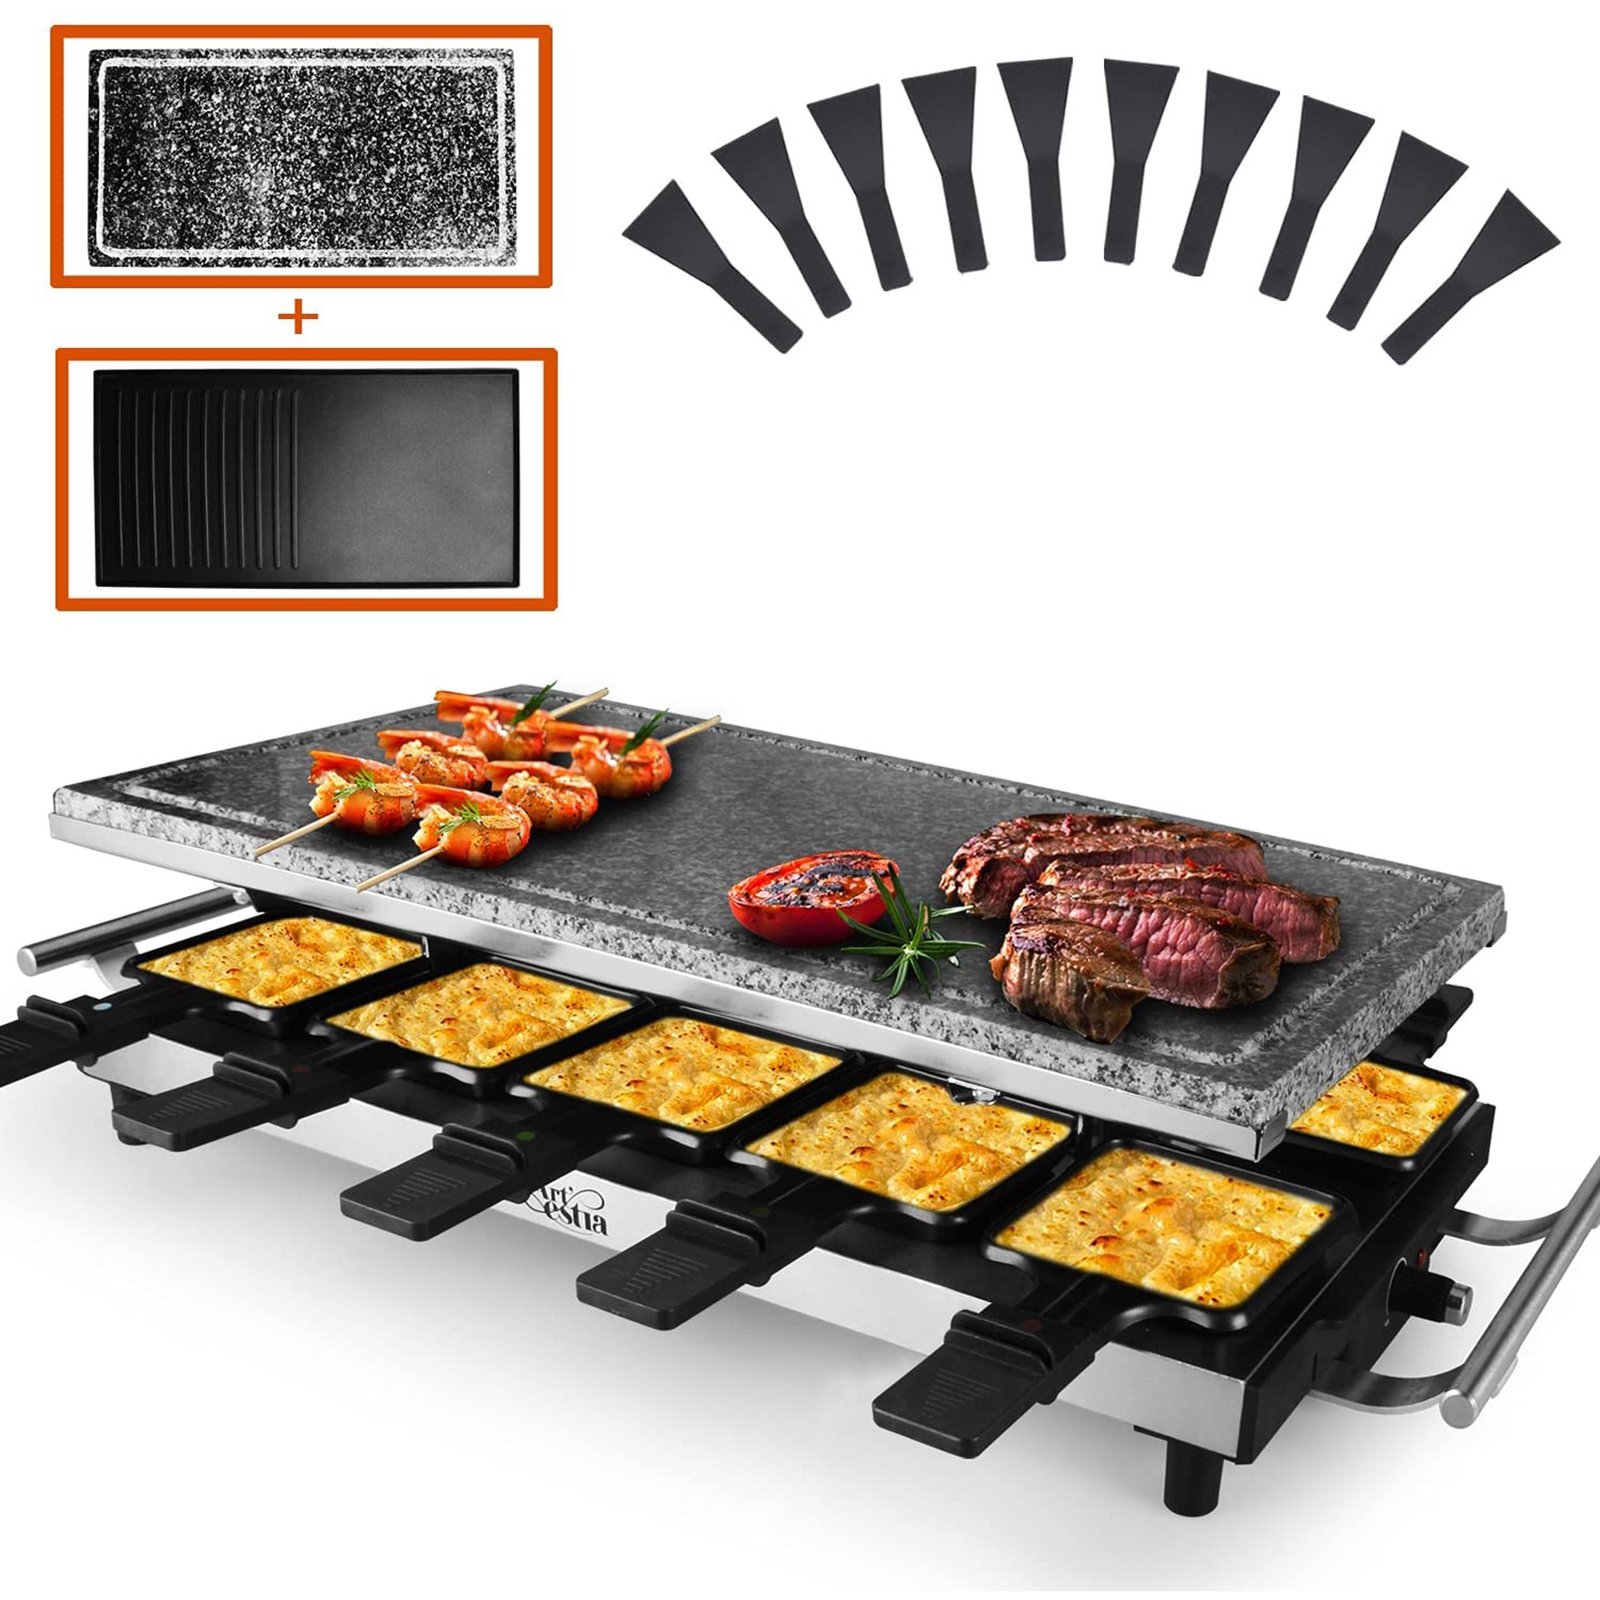 https://themarketdepot.com/wp-content/uploads/2023/01/Artestia-raclette-table-grill1500W-indoor-raclette-grill10-Paddles-Korean-BBQ-Grillelectric-indoor-grill-with-raclette-stone-and-Non-Stick-Reversible-Aluminum-Plate-for-Parties-and-Family-4.jpeg